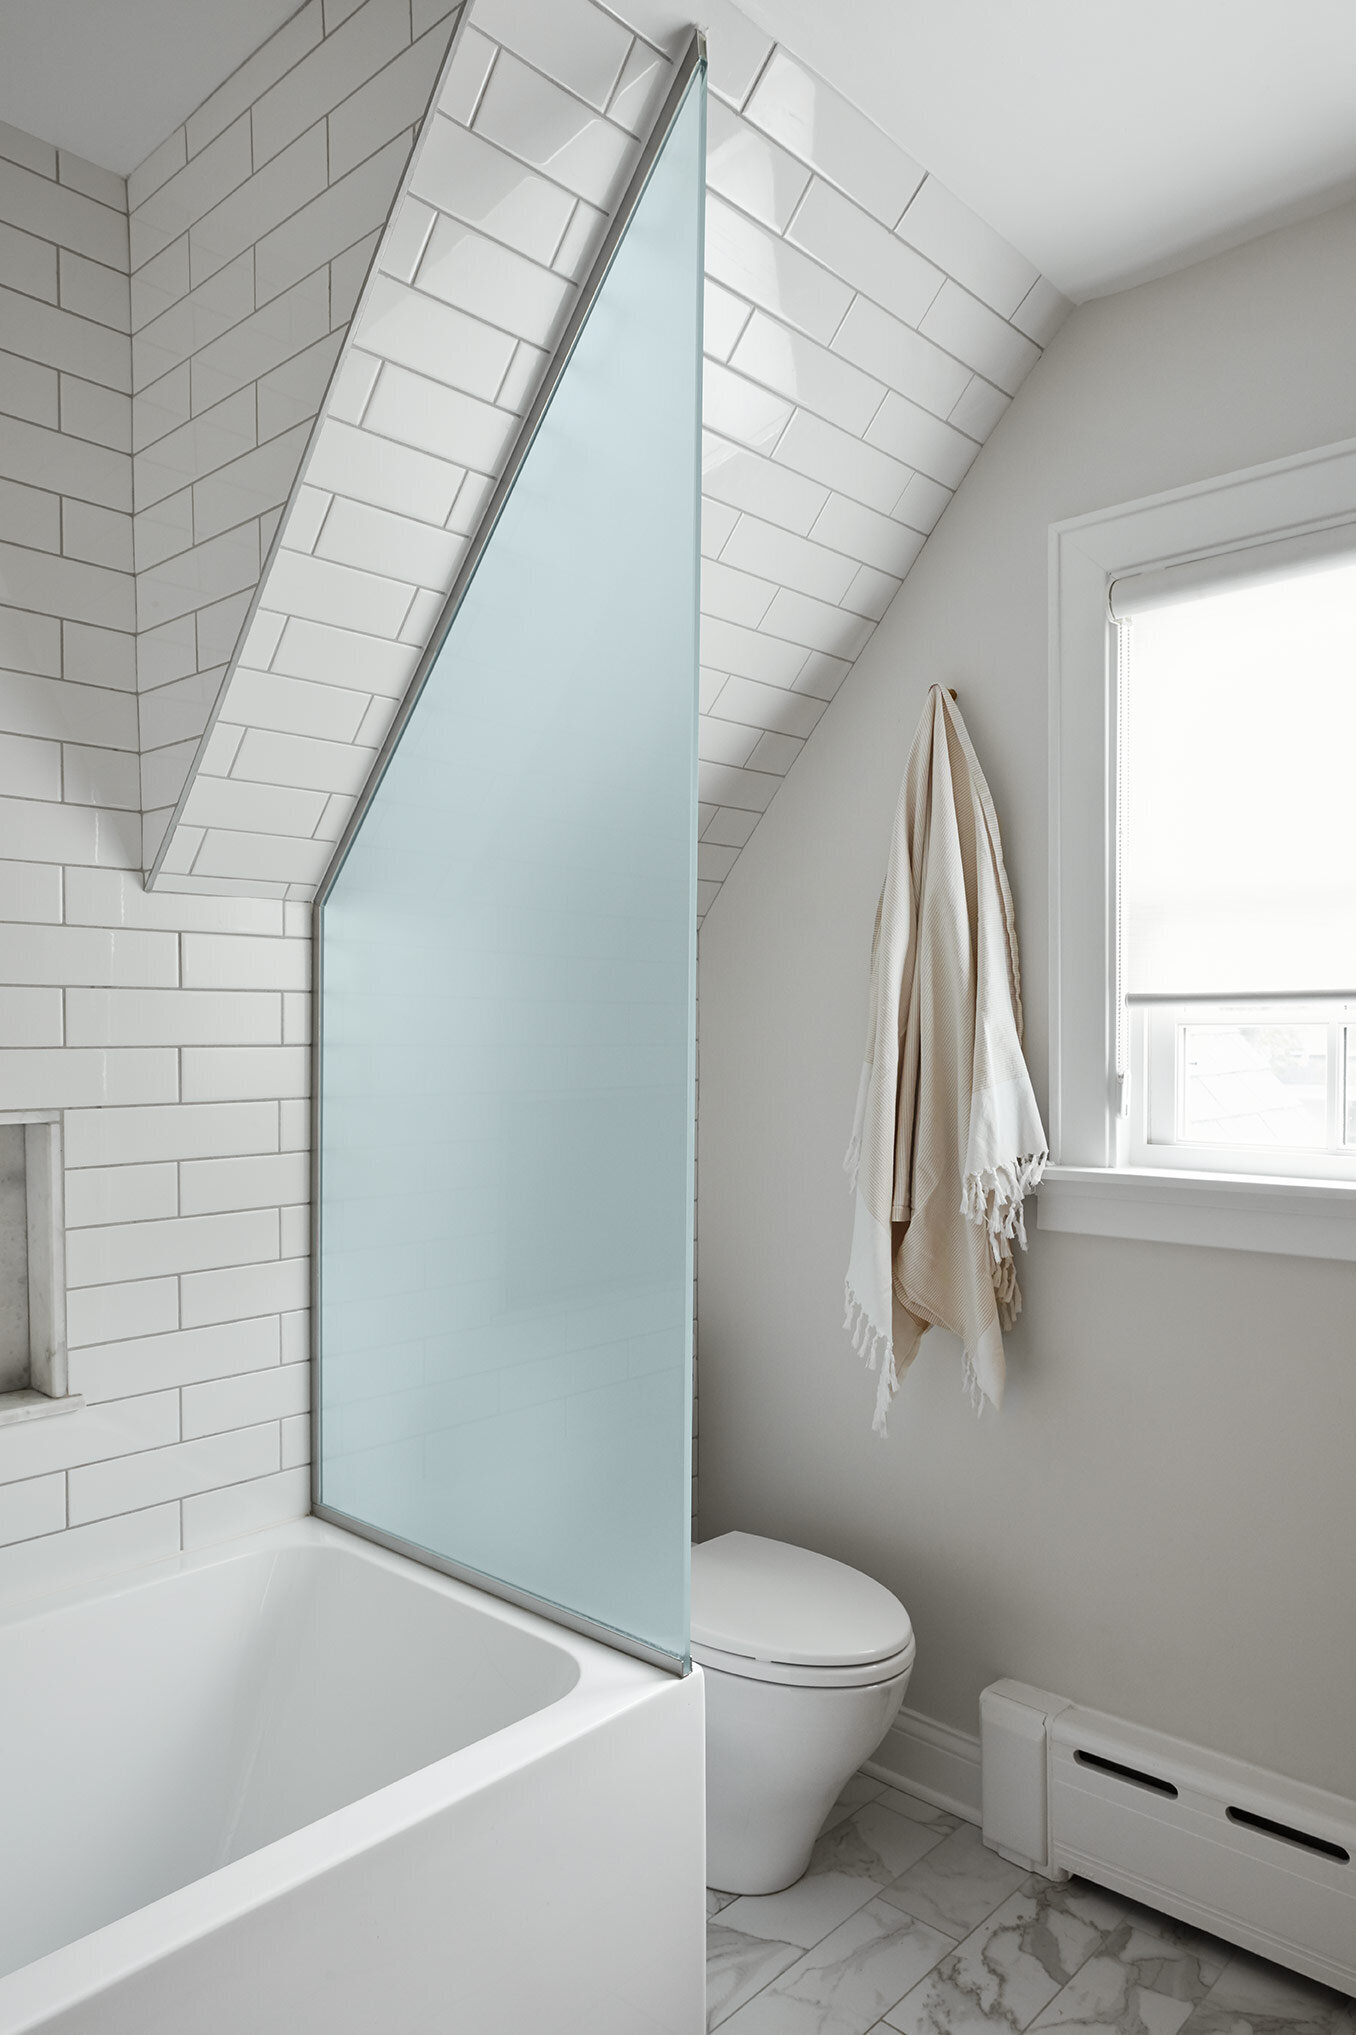 Shower with white tiles and grey walls